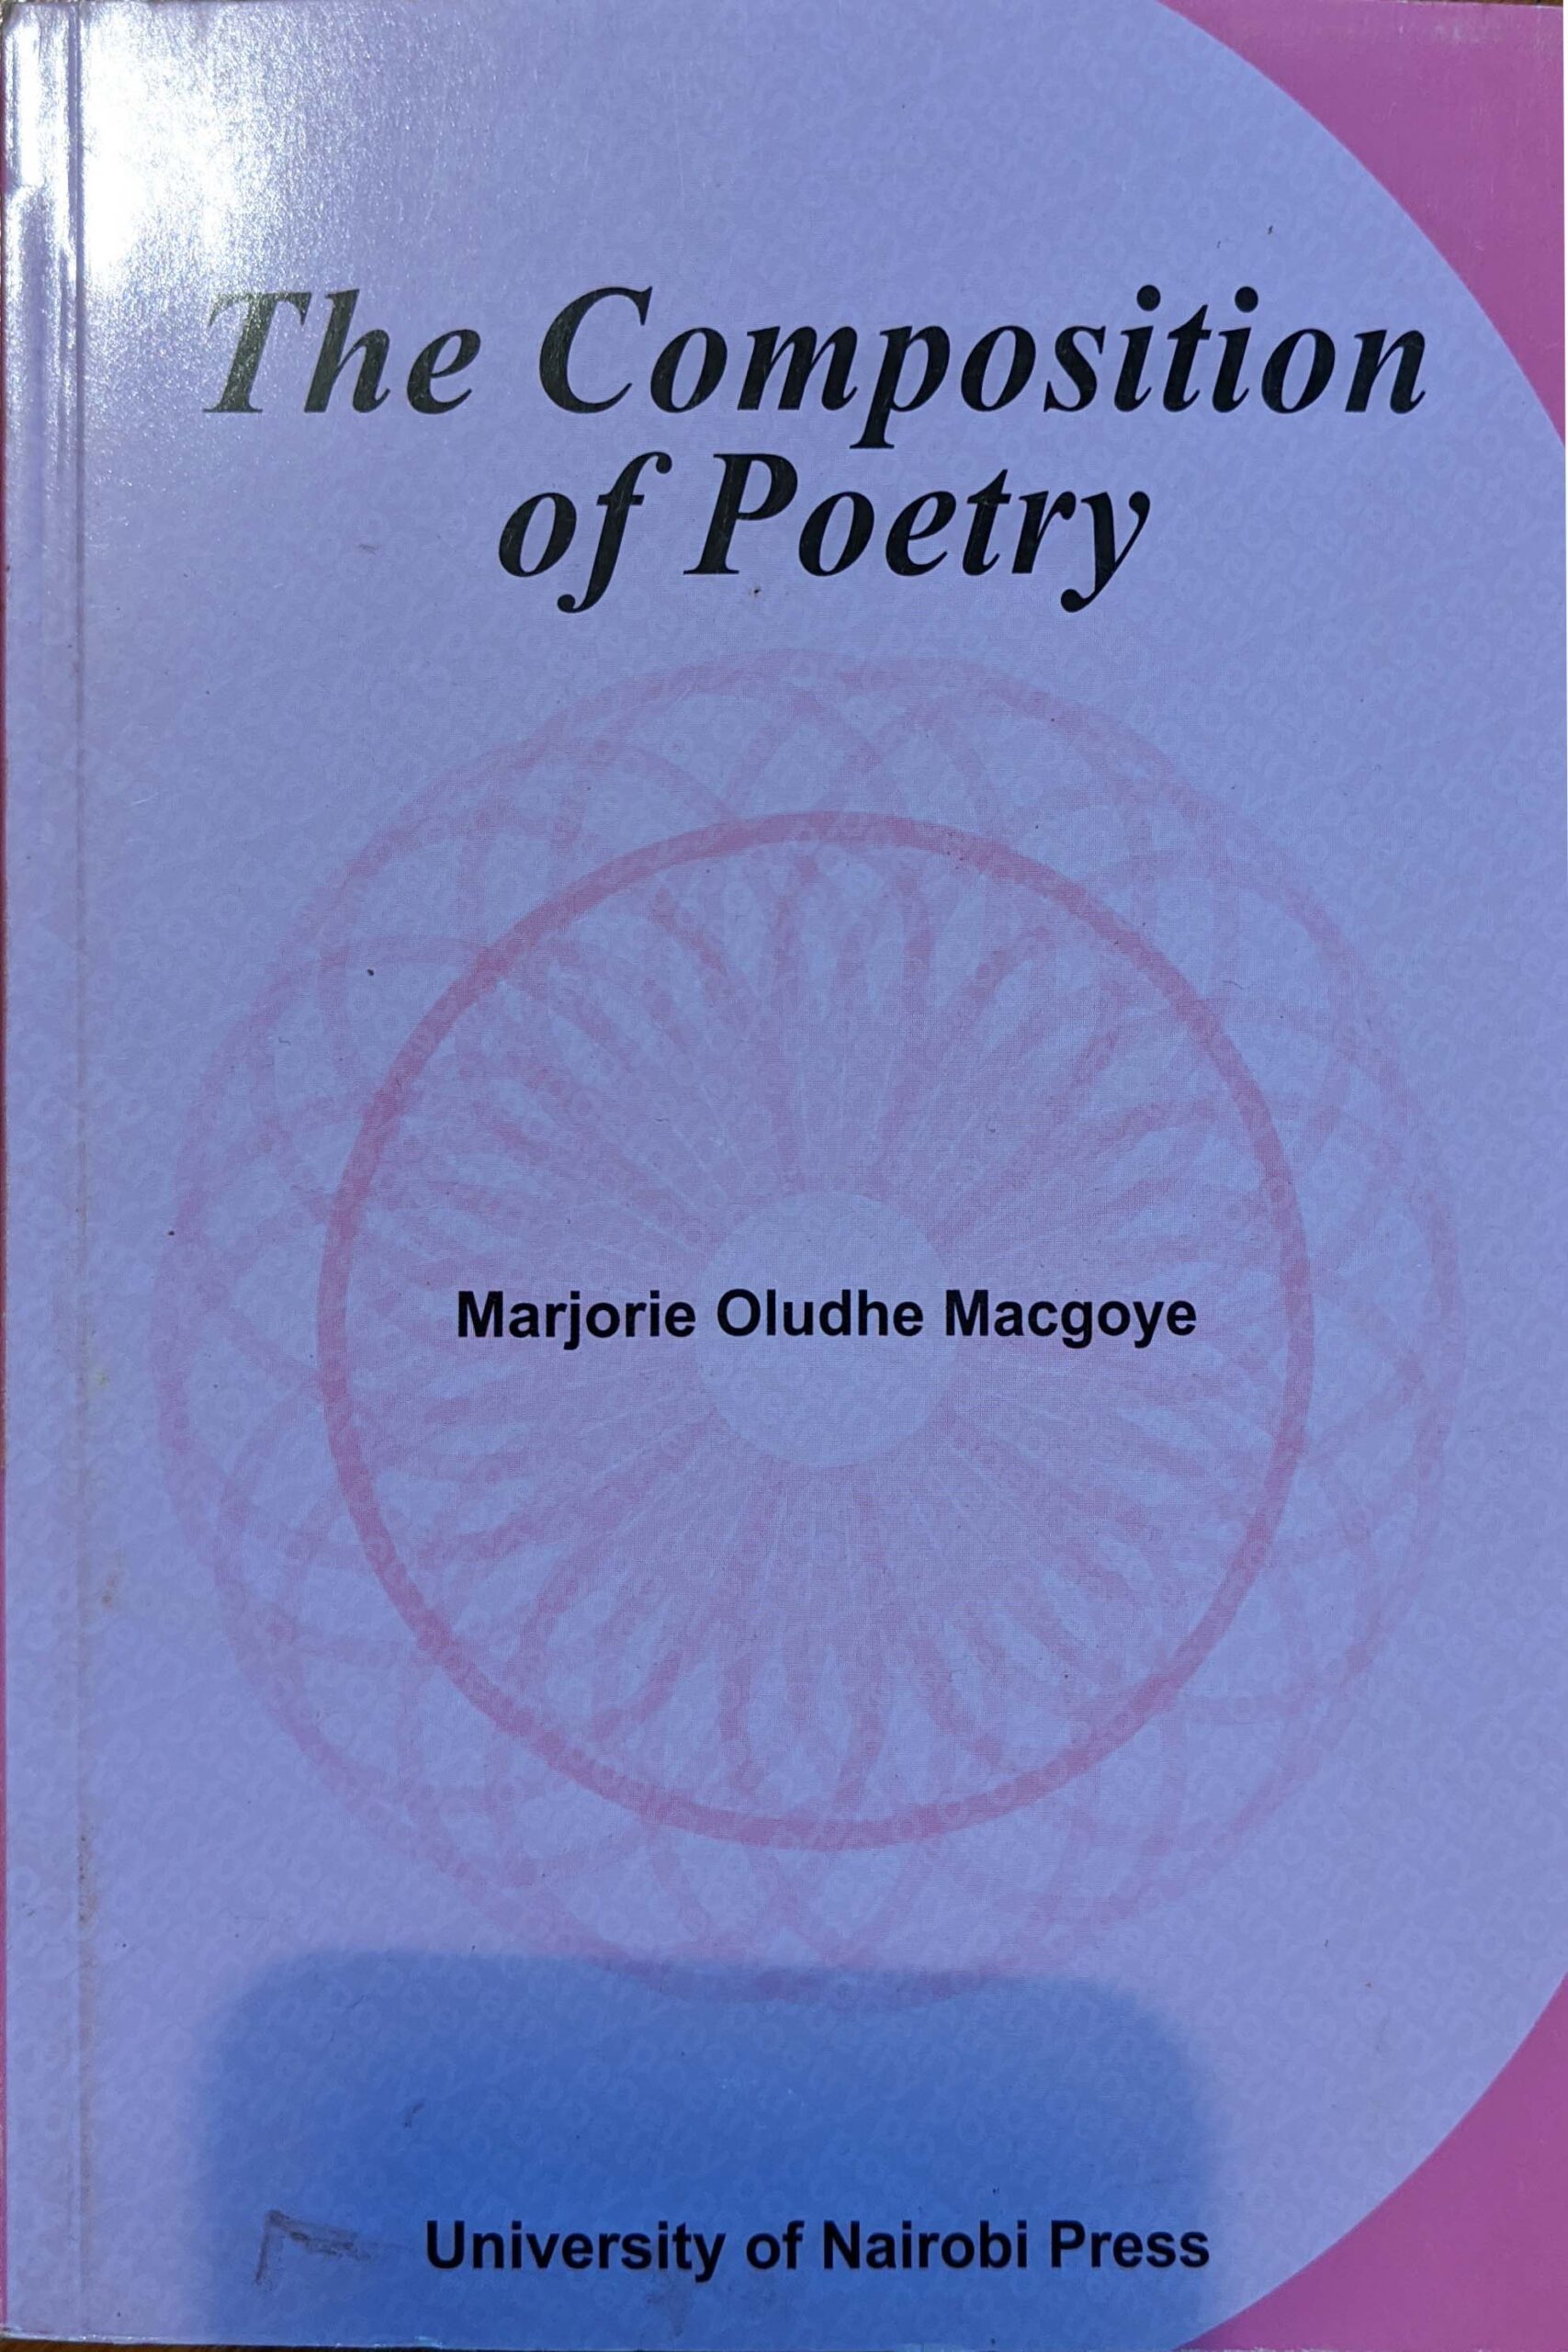 the composition of poetry Marjorie Oludhe